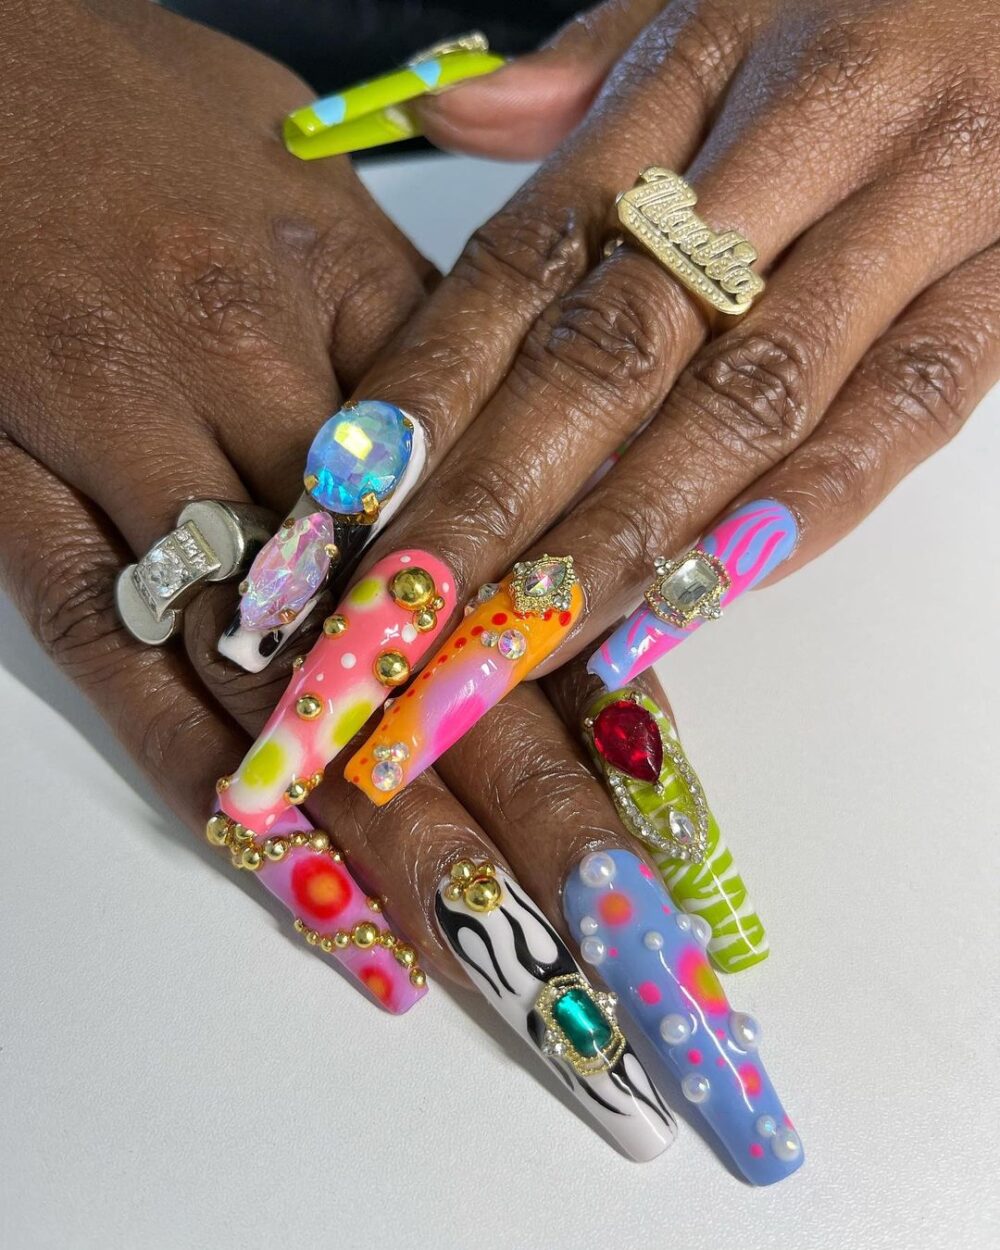 Nail Art Is More Than a Fad to Black Women, It’s Culture – The Soulhaus